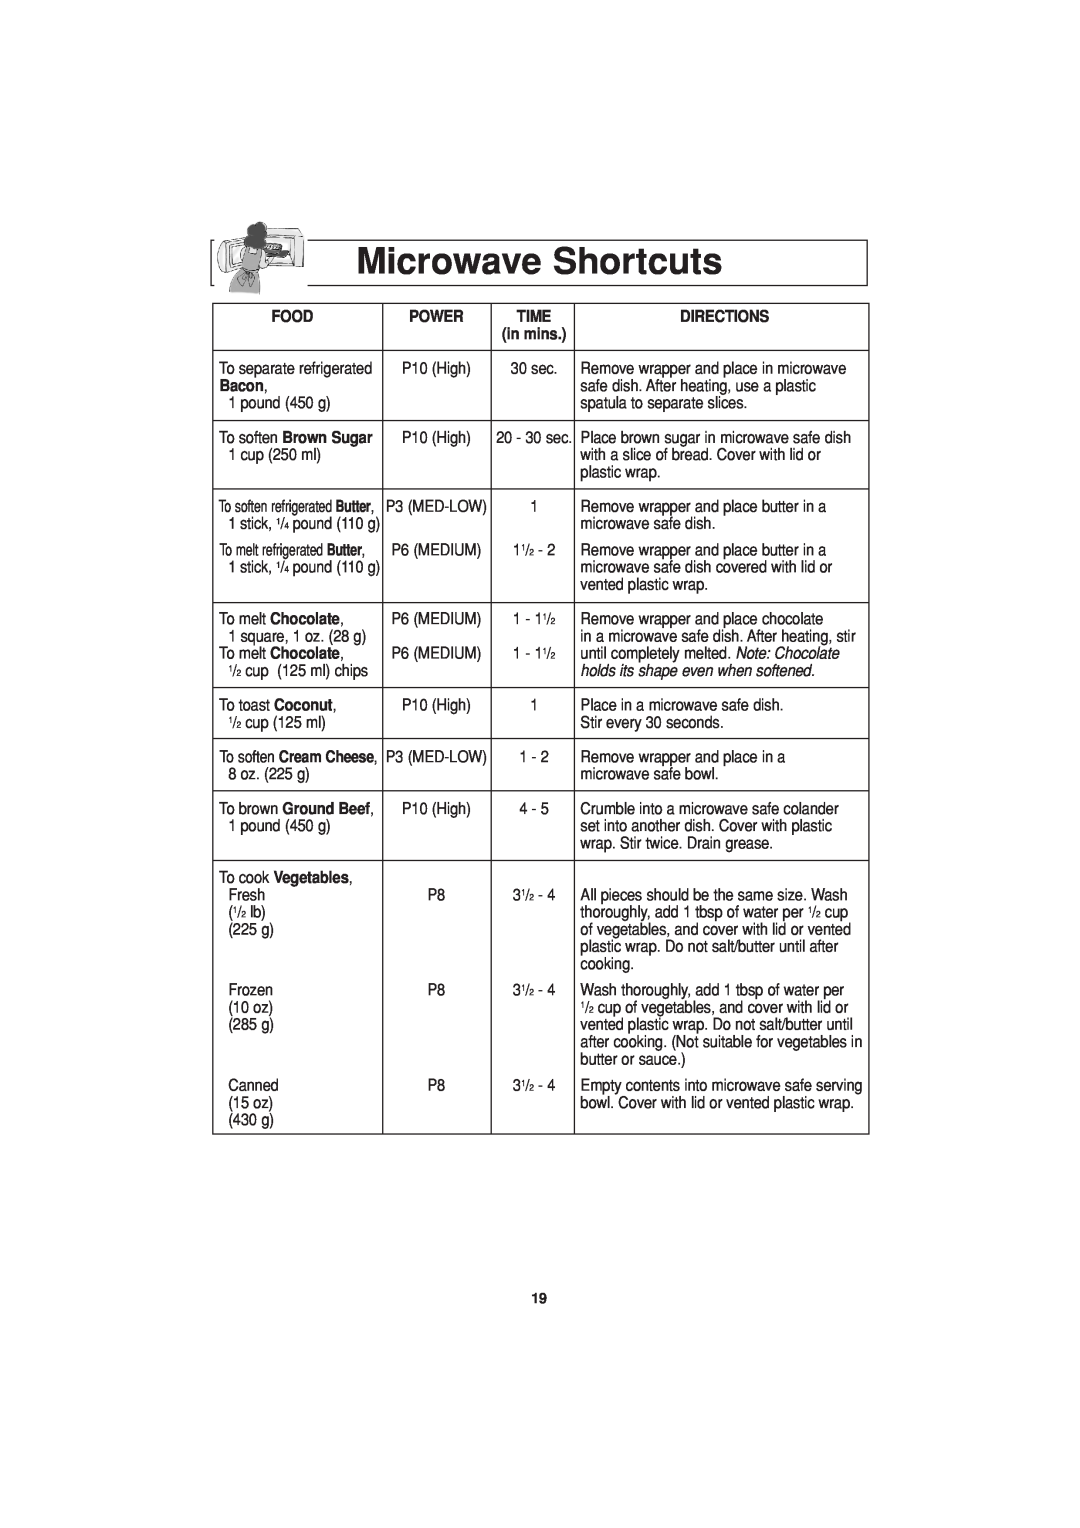 Panasonic NN-H634, NN-H644 important safety instructions Microwave Shortcuts, holds its shape even when softened 